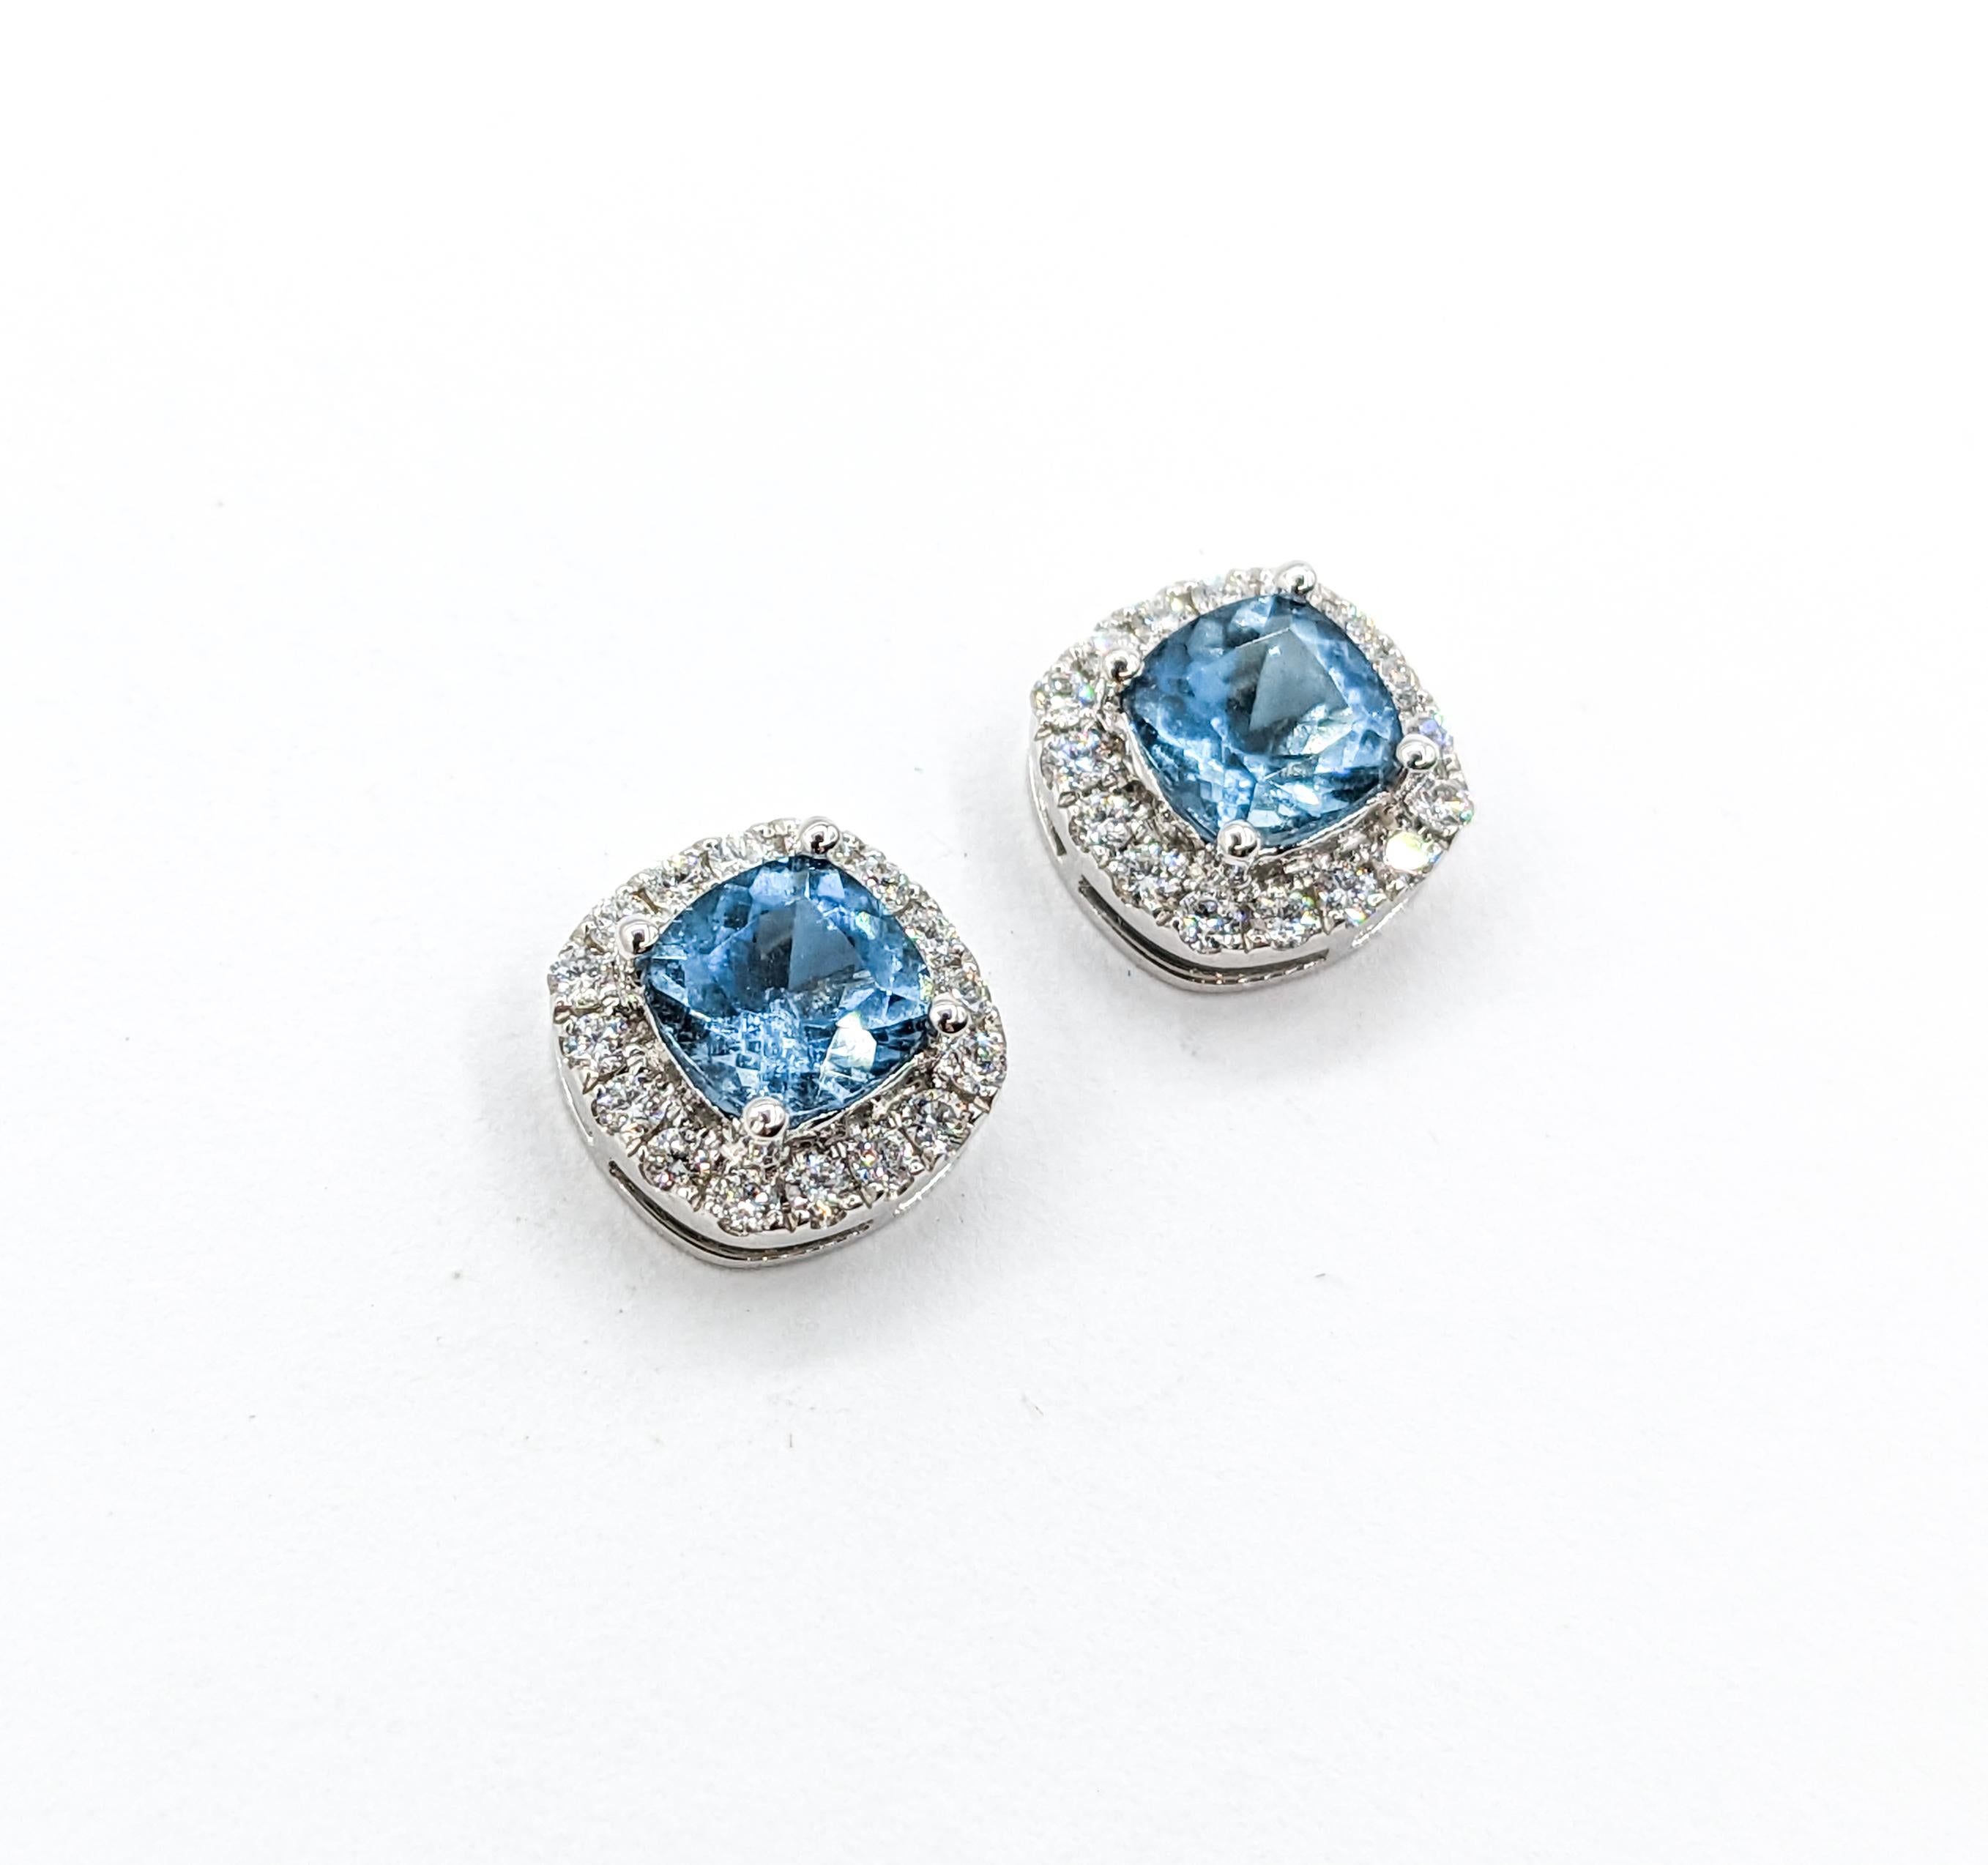 Aquamarine & Diamond Stud Earrings

Introducing our exquisite 14kt White Gold Earrings, a perfect combination of elegance and charm. These beautiful earrings are crafted with meticulous attention to detail and feature a total diamond weight of